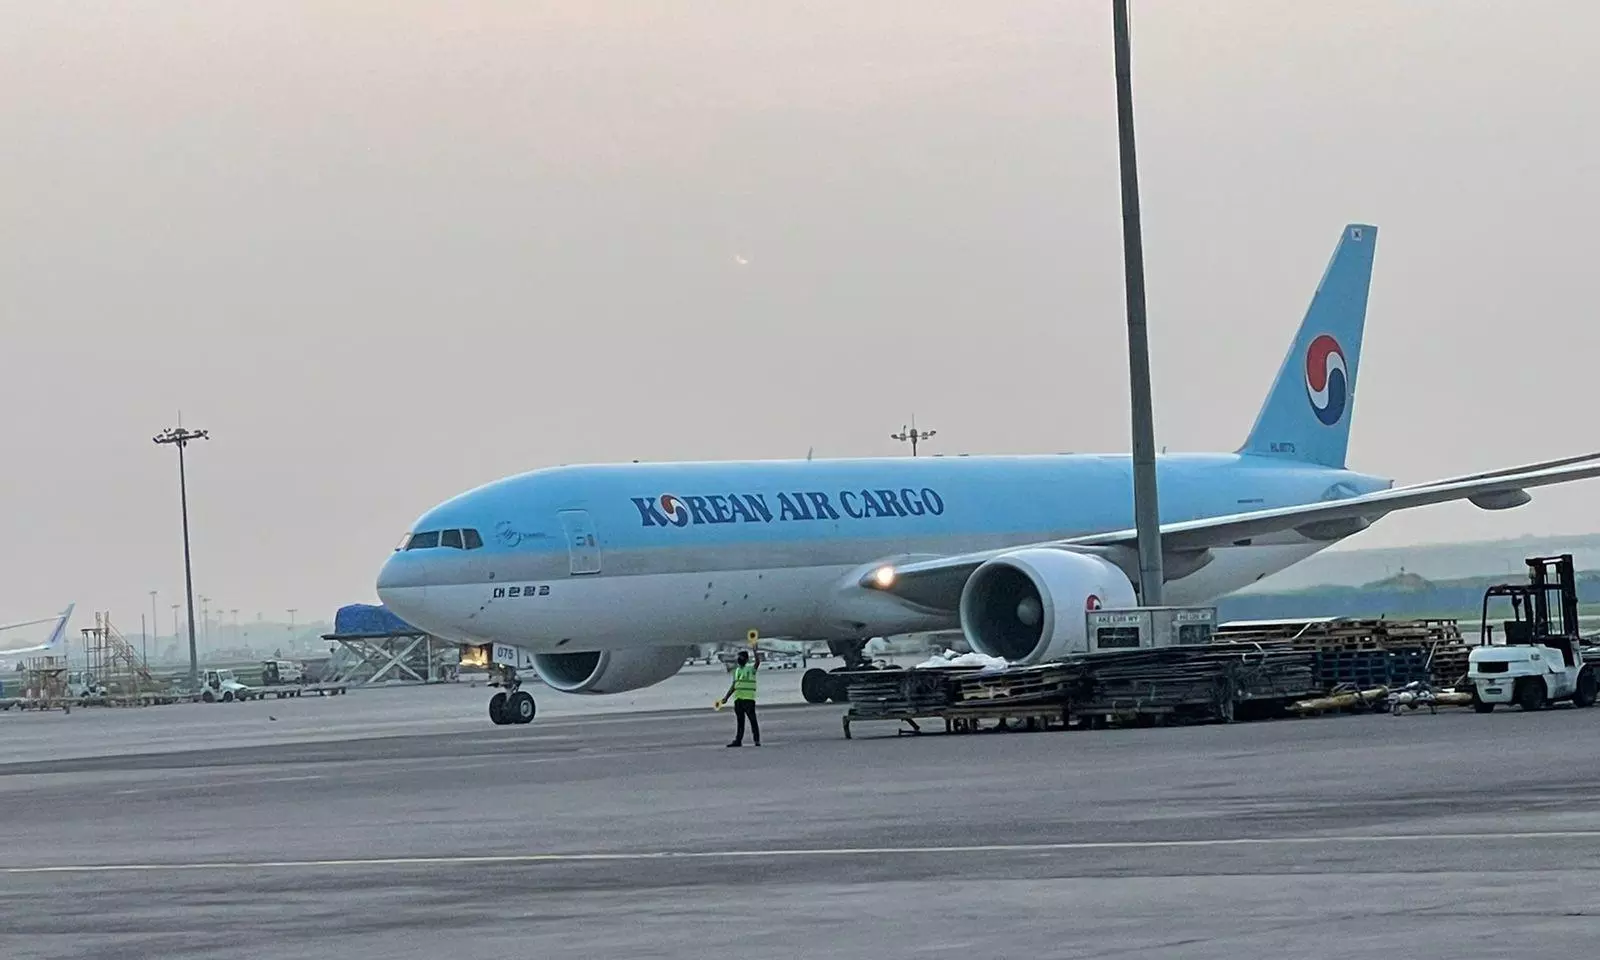 Arrival of the first Korean Air Cargo B777 freighter after service resumption at Delhi International Airport on Wednesday, July 6, 2022.